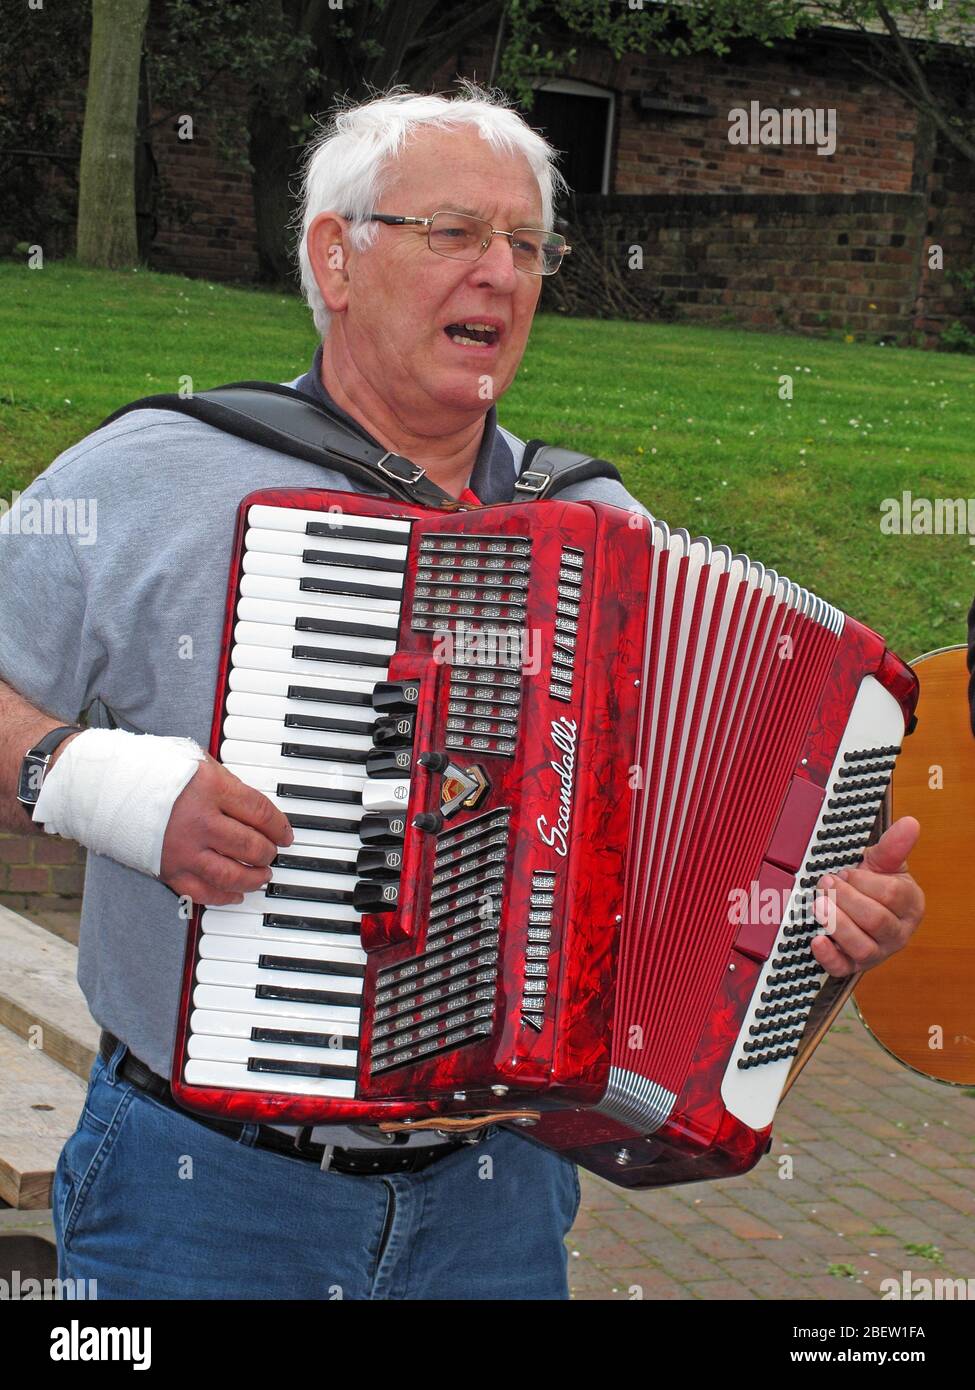 Scandalli Accordion Player, accordéoniste, Cheshire , Angleterre, Royaume-Uni construit à Camerano, Italie, Europe Banque D'Images